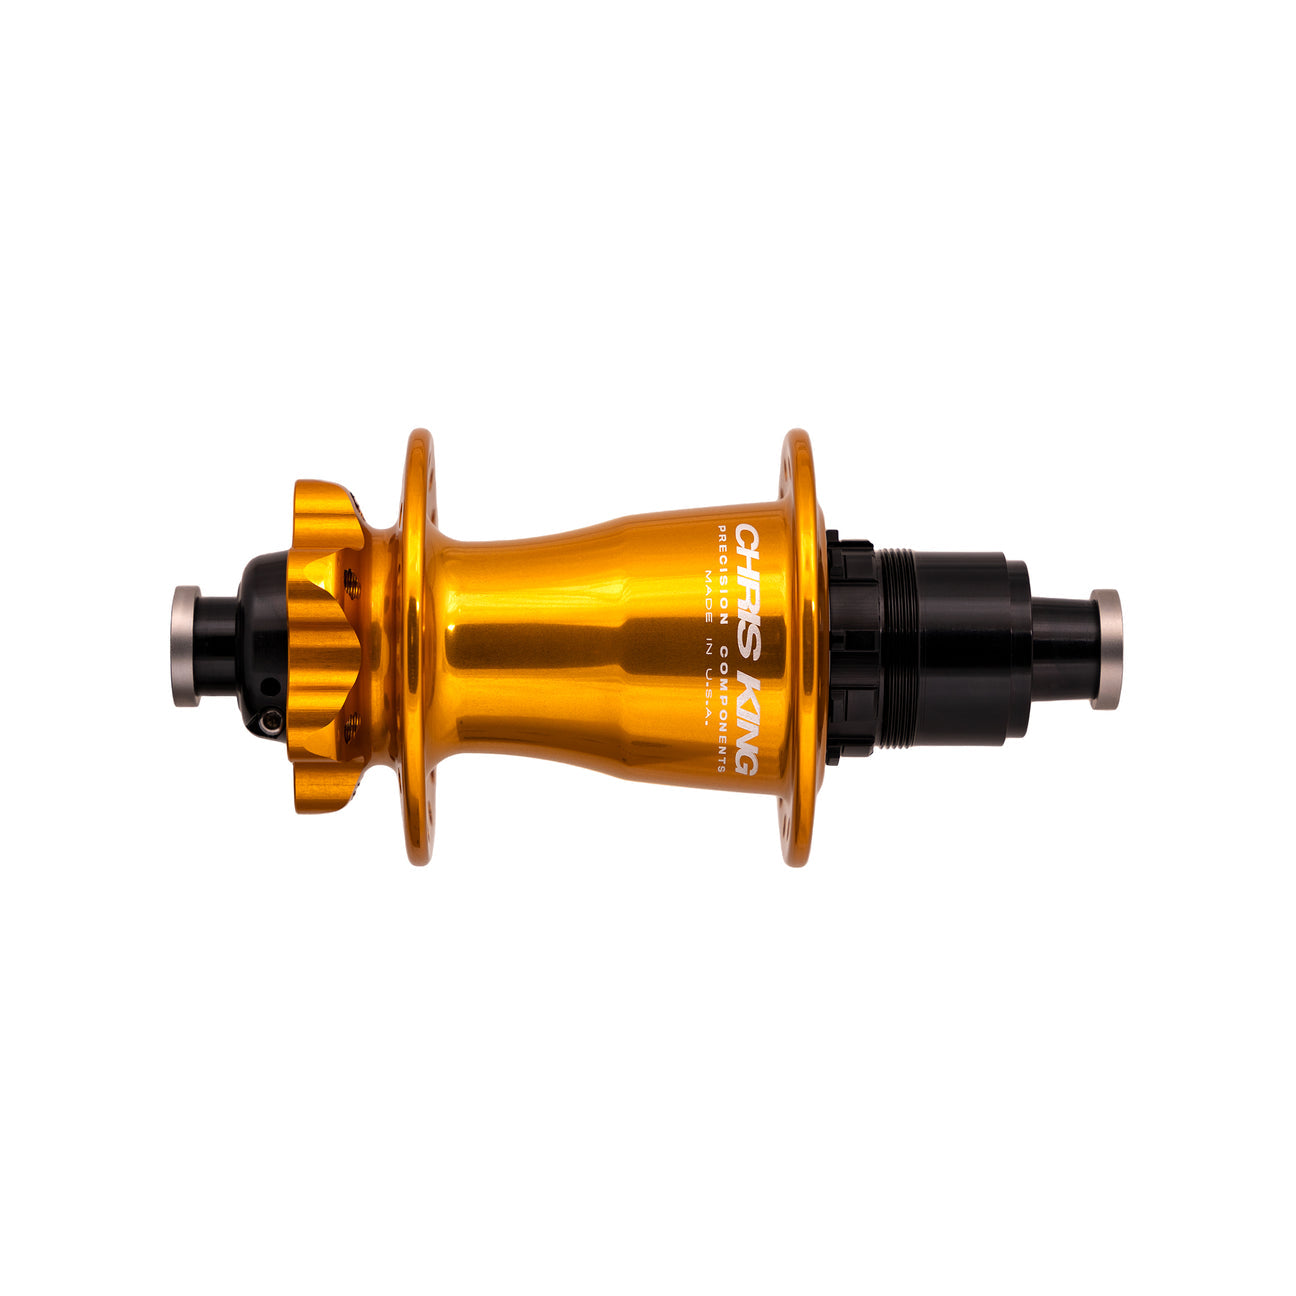 Chris King boost 6 bolt rear in gold